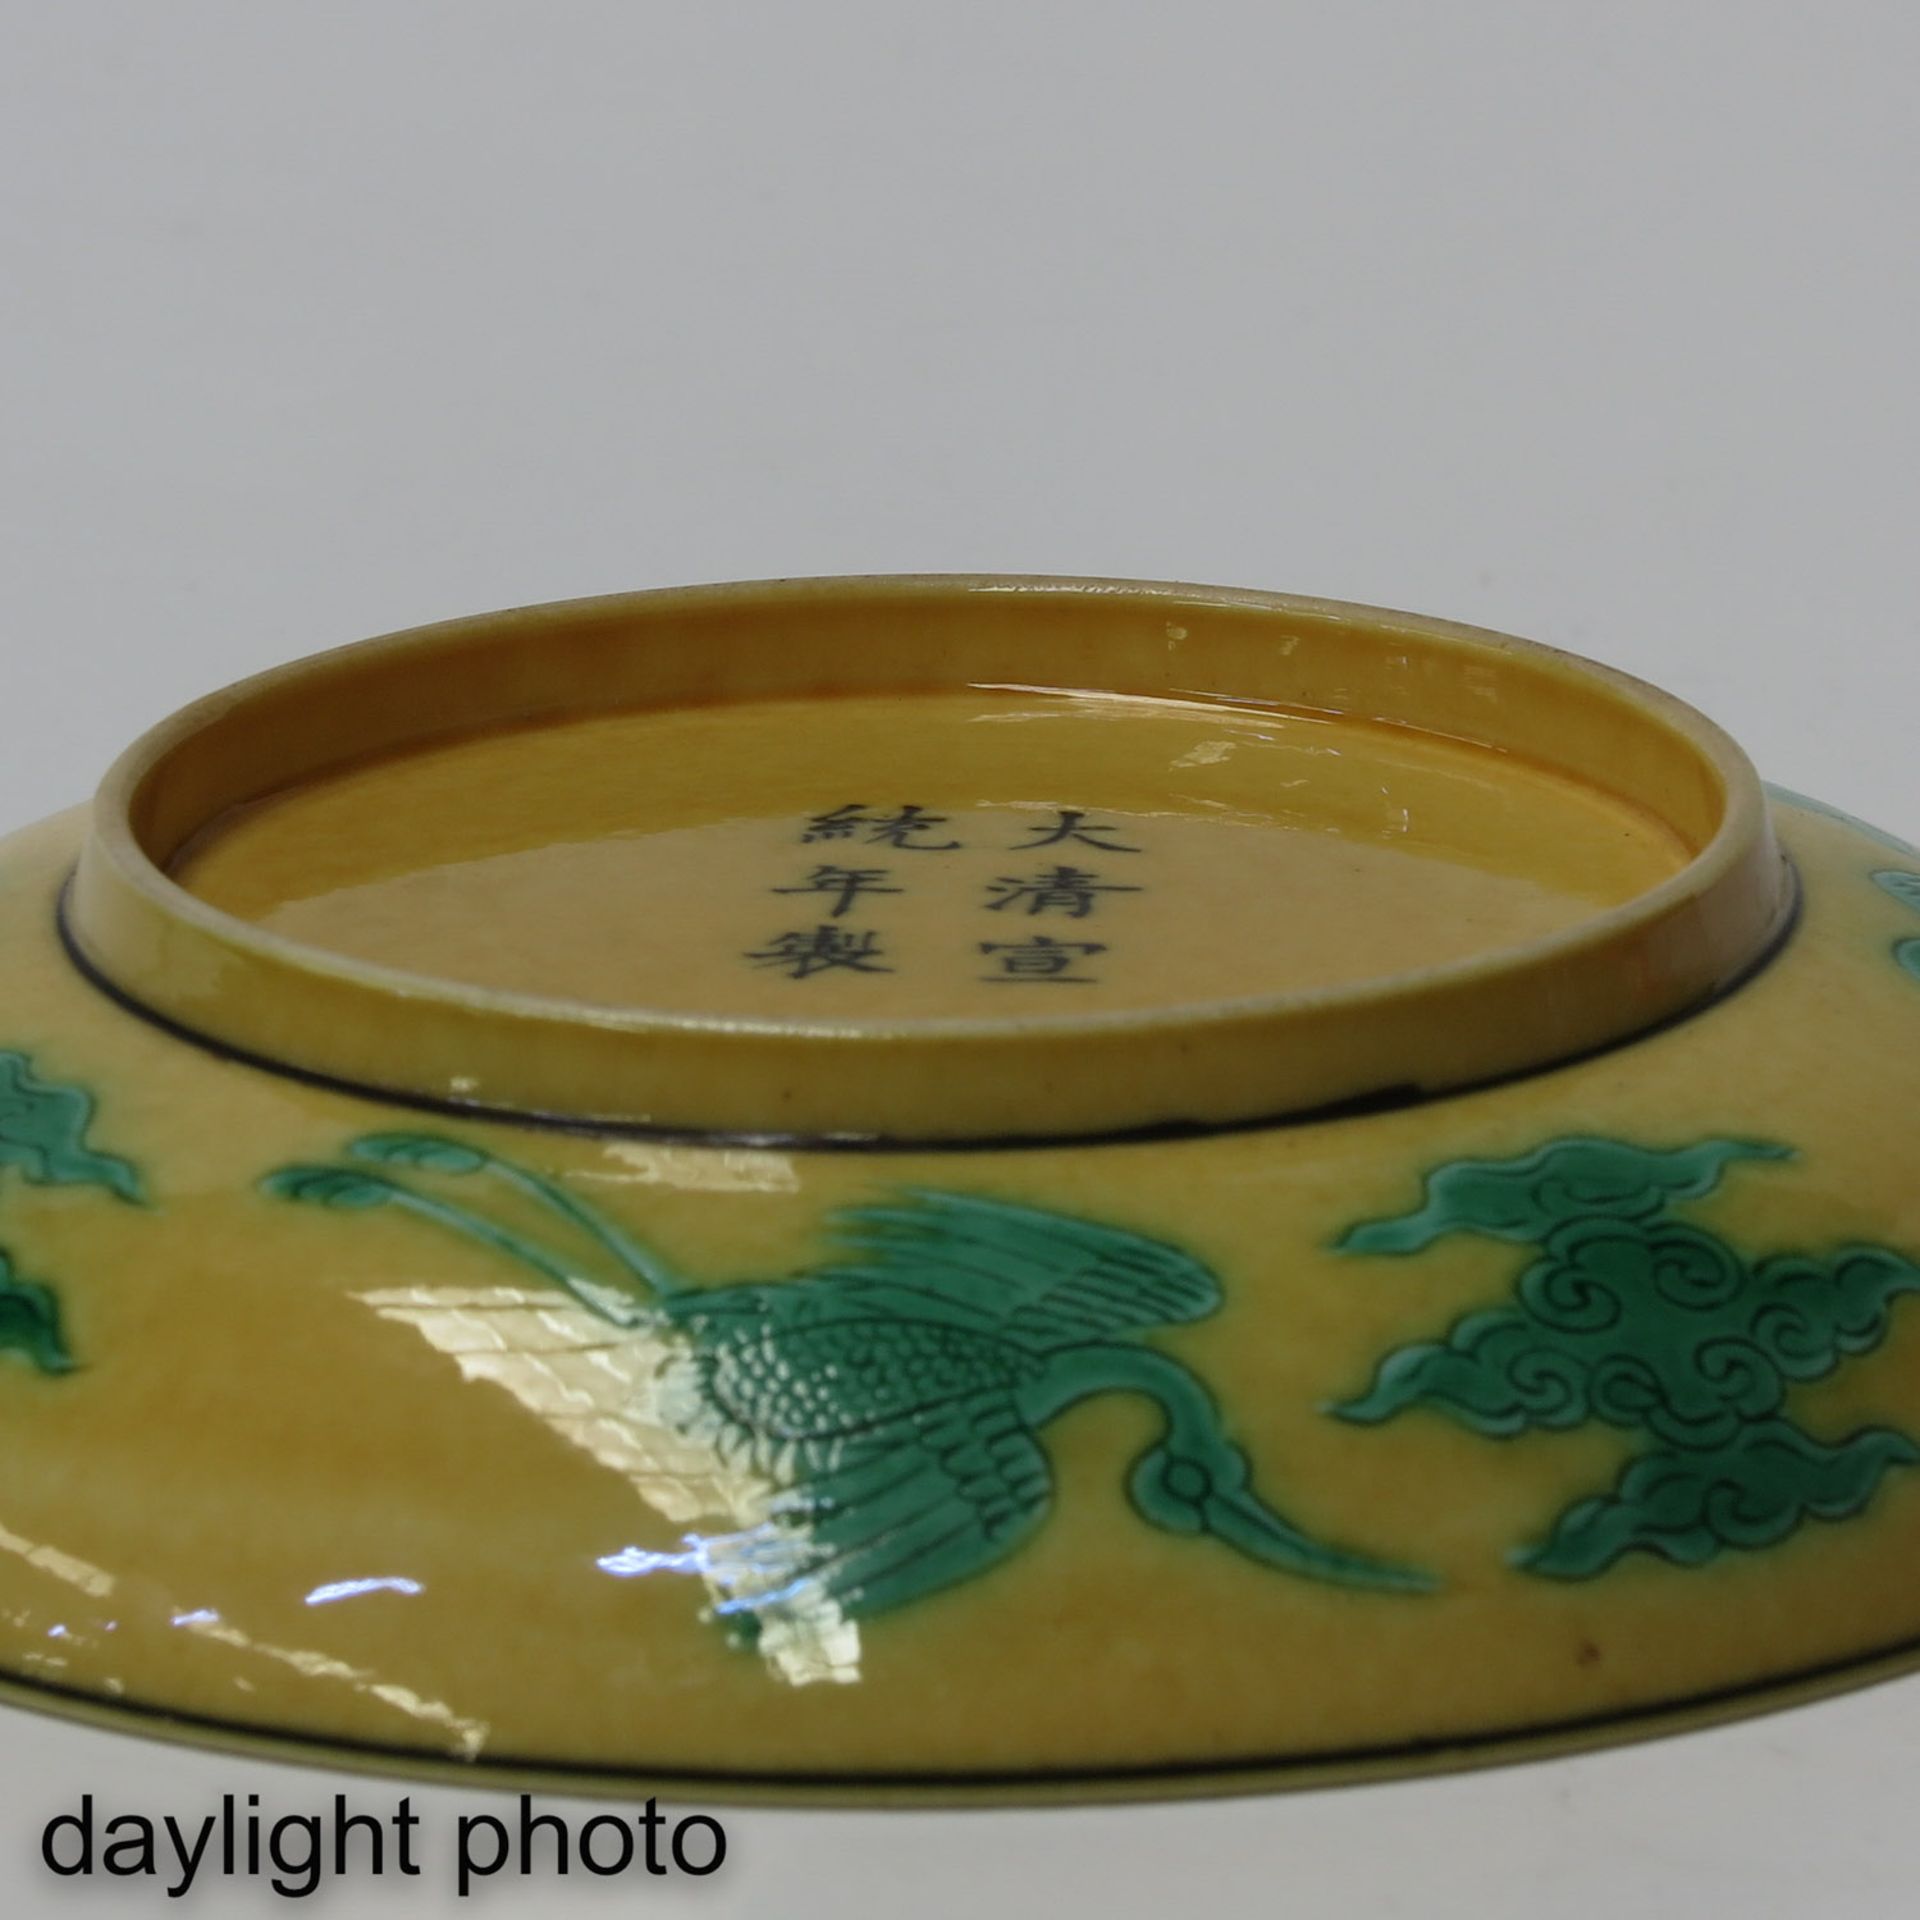 A Dragon and Cloud Decor Dish - Image 4 of 6